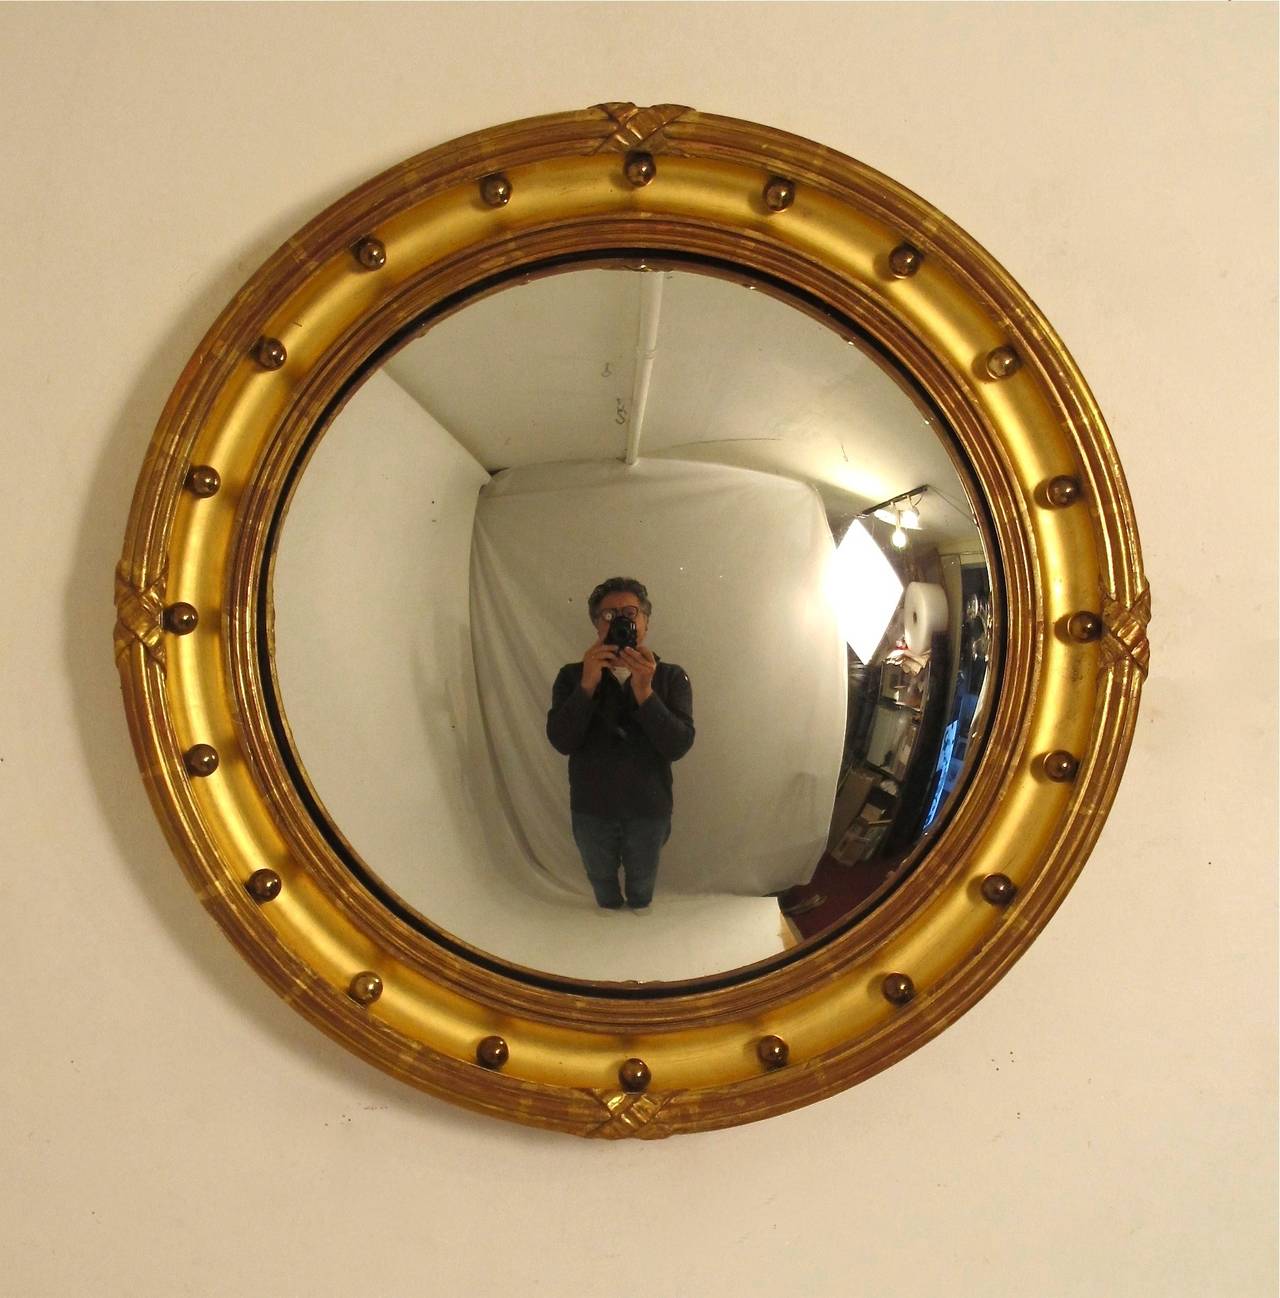 Carved wood and beautifully gilt English convex mirror with unusual solid brass balls detail. England, circa 1820.